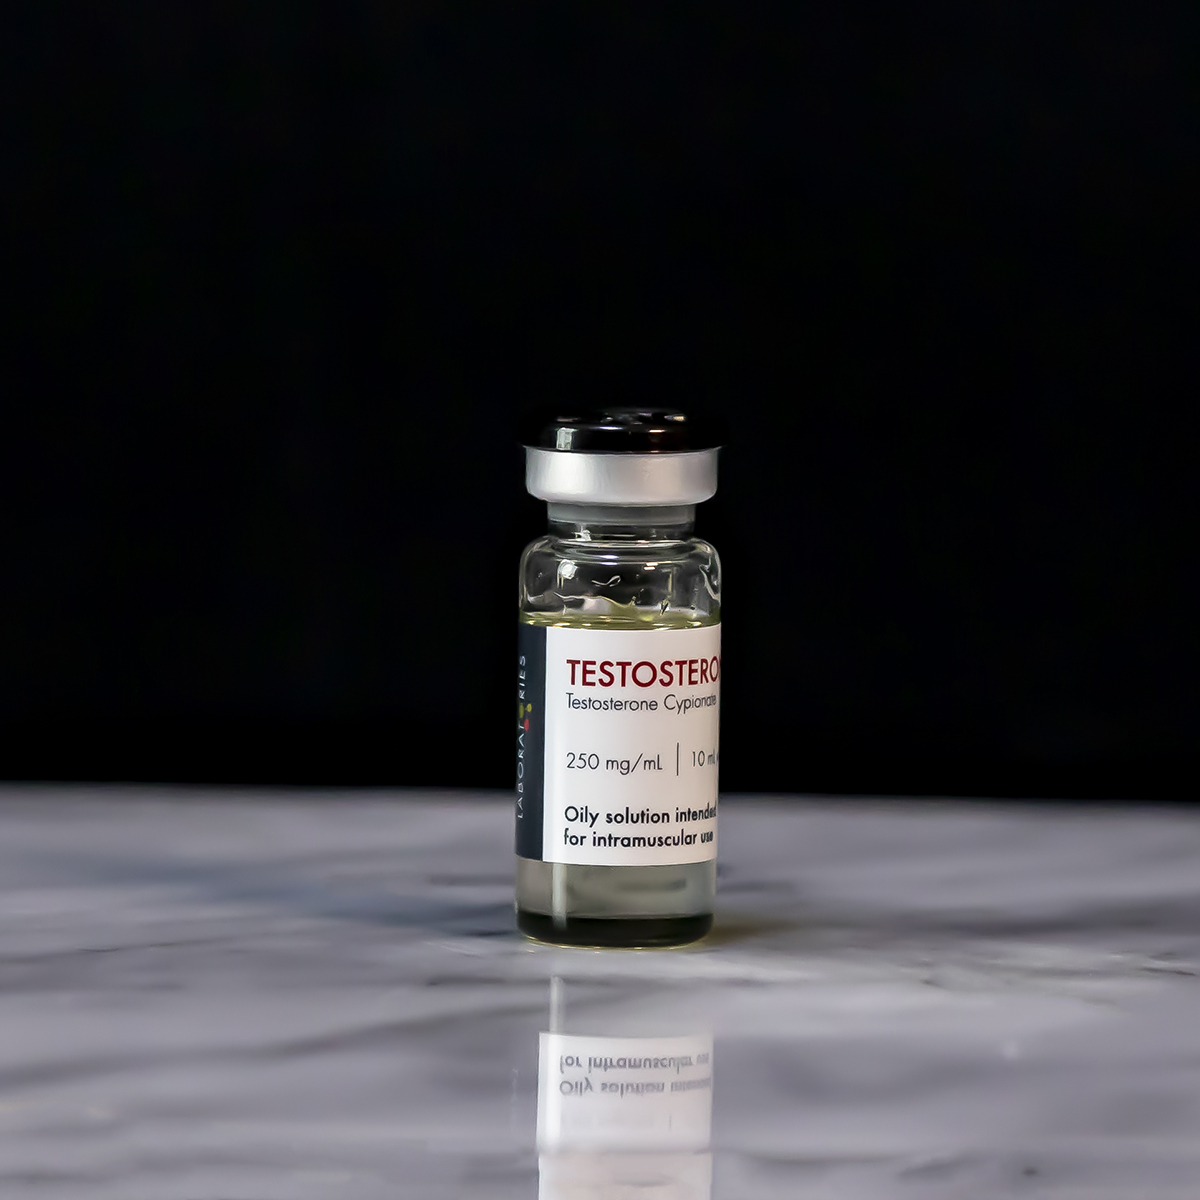 A captivating image of Testosterone Cypionate by Legacy Pharma, featuring the brand name - Testosterone Cypionate, and the manufacturer's name - Legacy Pharma, symbolizing its role in empowering hormonal balance, vitality, muscle growth, and well-being. Sold and shipped by Legacy Laboratories in Canada